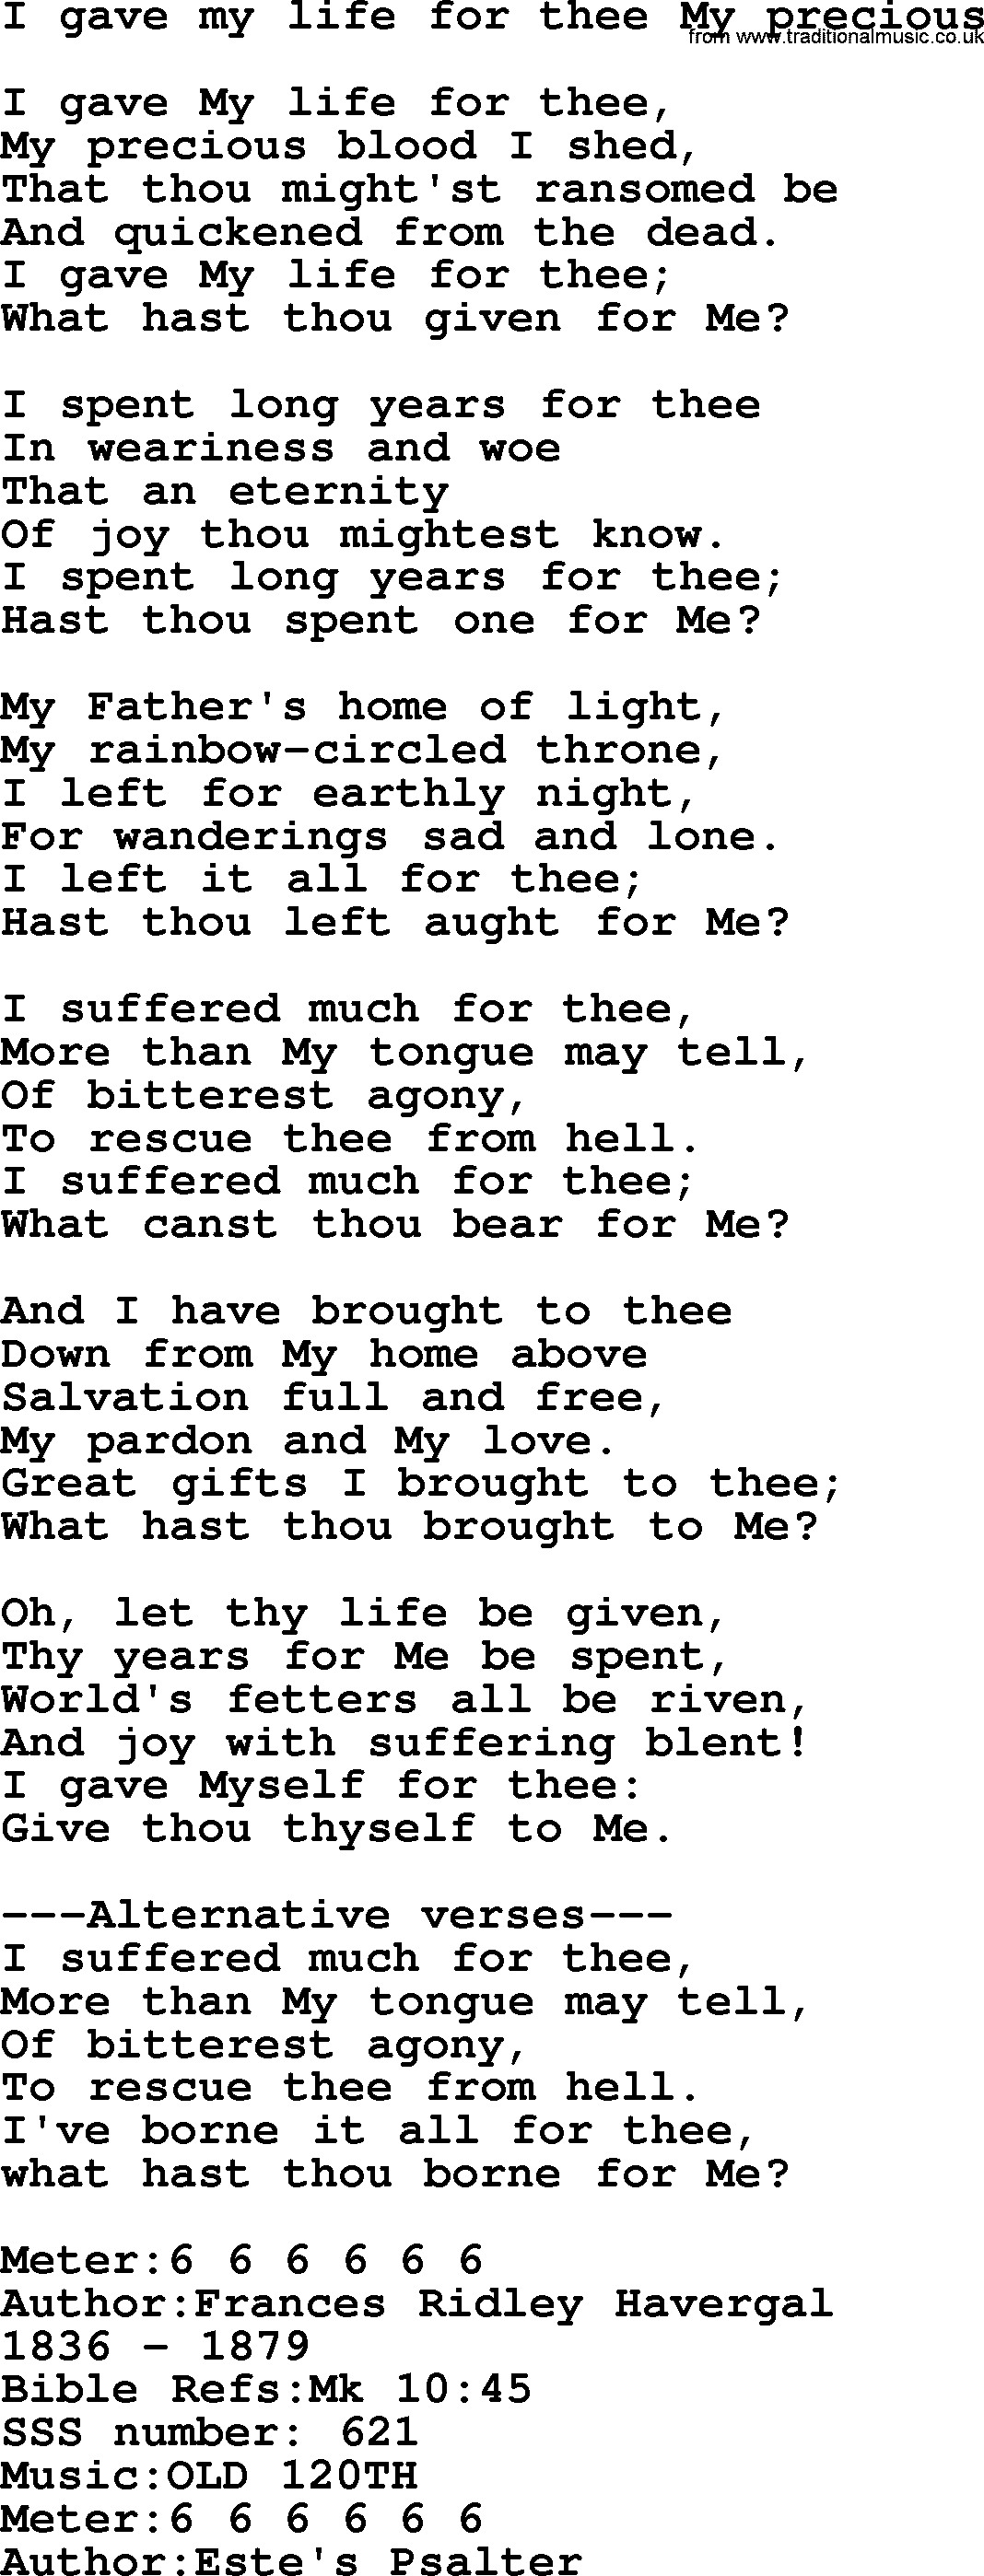 Sacred Songs and Solos complete, 1200 Hymns, title: I Gave My Life For Thee My Precious, lyrics and PDF